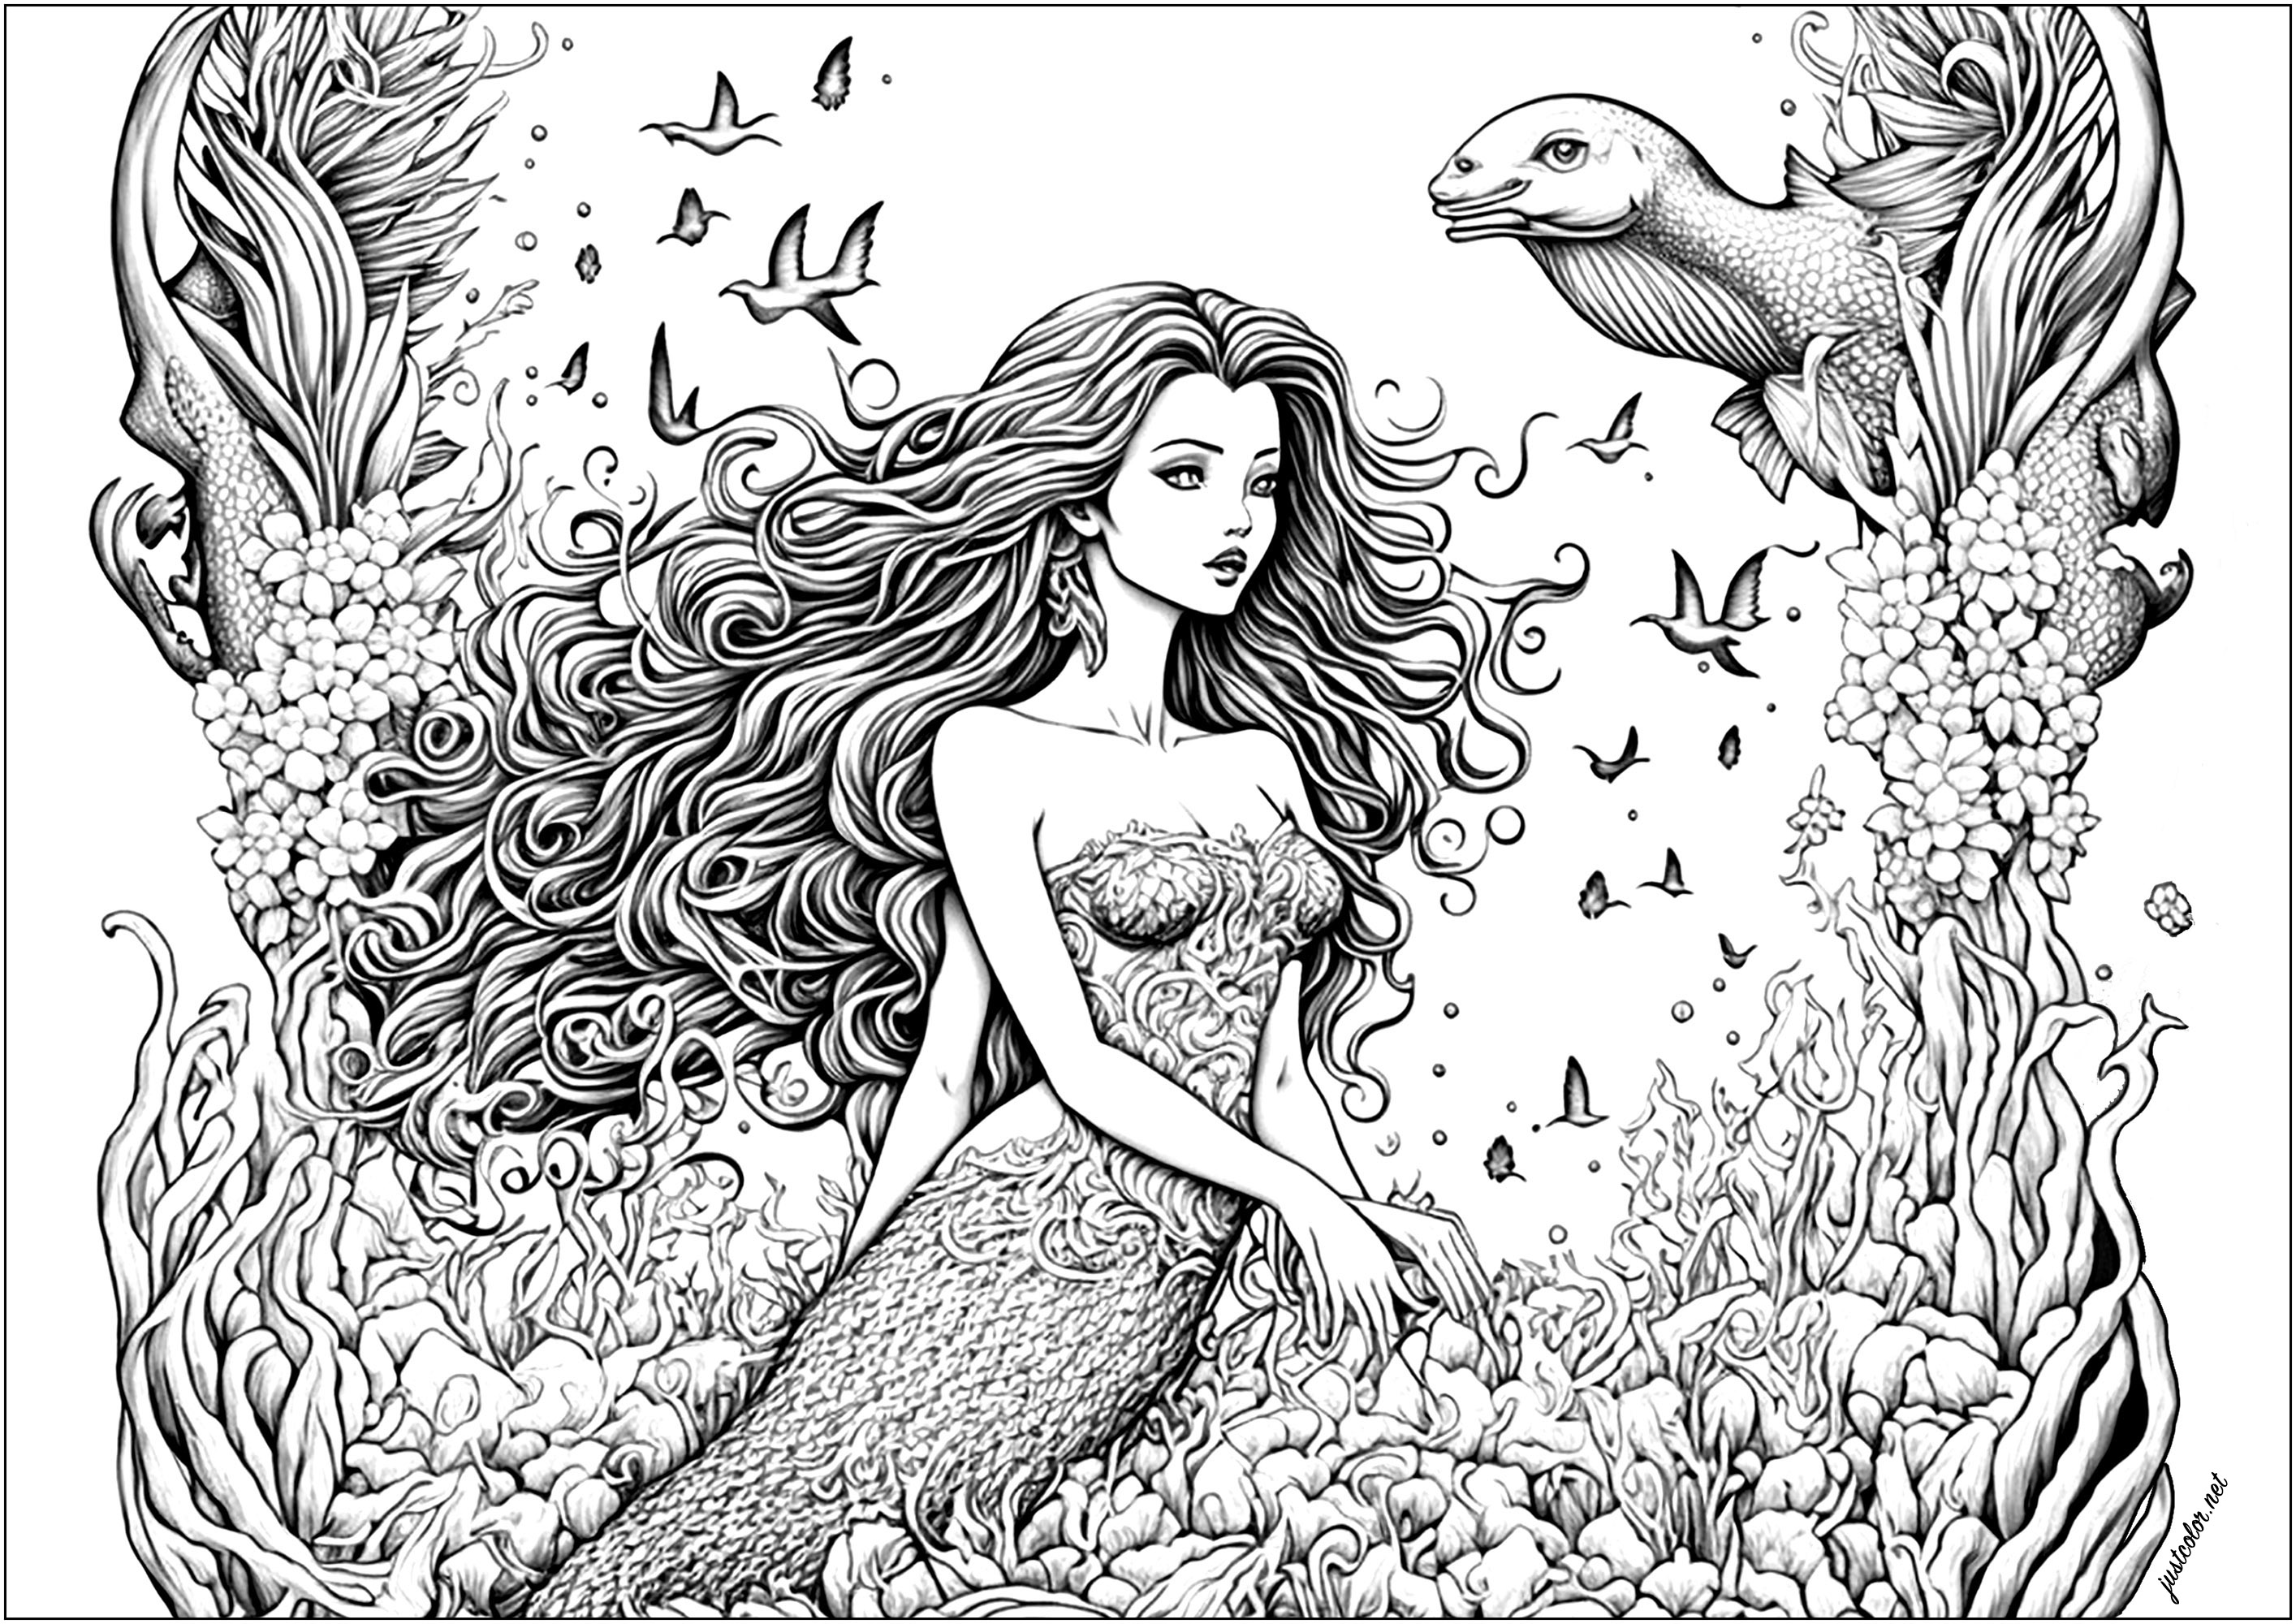 A mermaid sat on corals in the ocean, surrounded by fishes. They swim playfully around her, their vibrant scales glistening in the sunlight as she smiles and reach out to gently pet their heads.